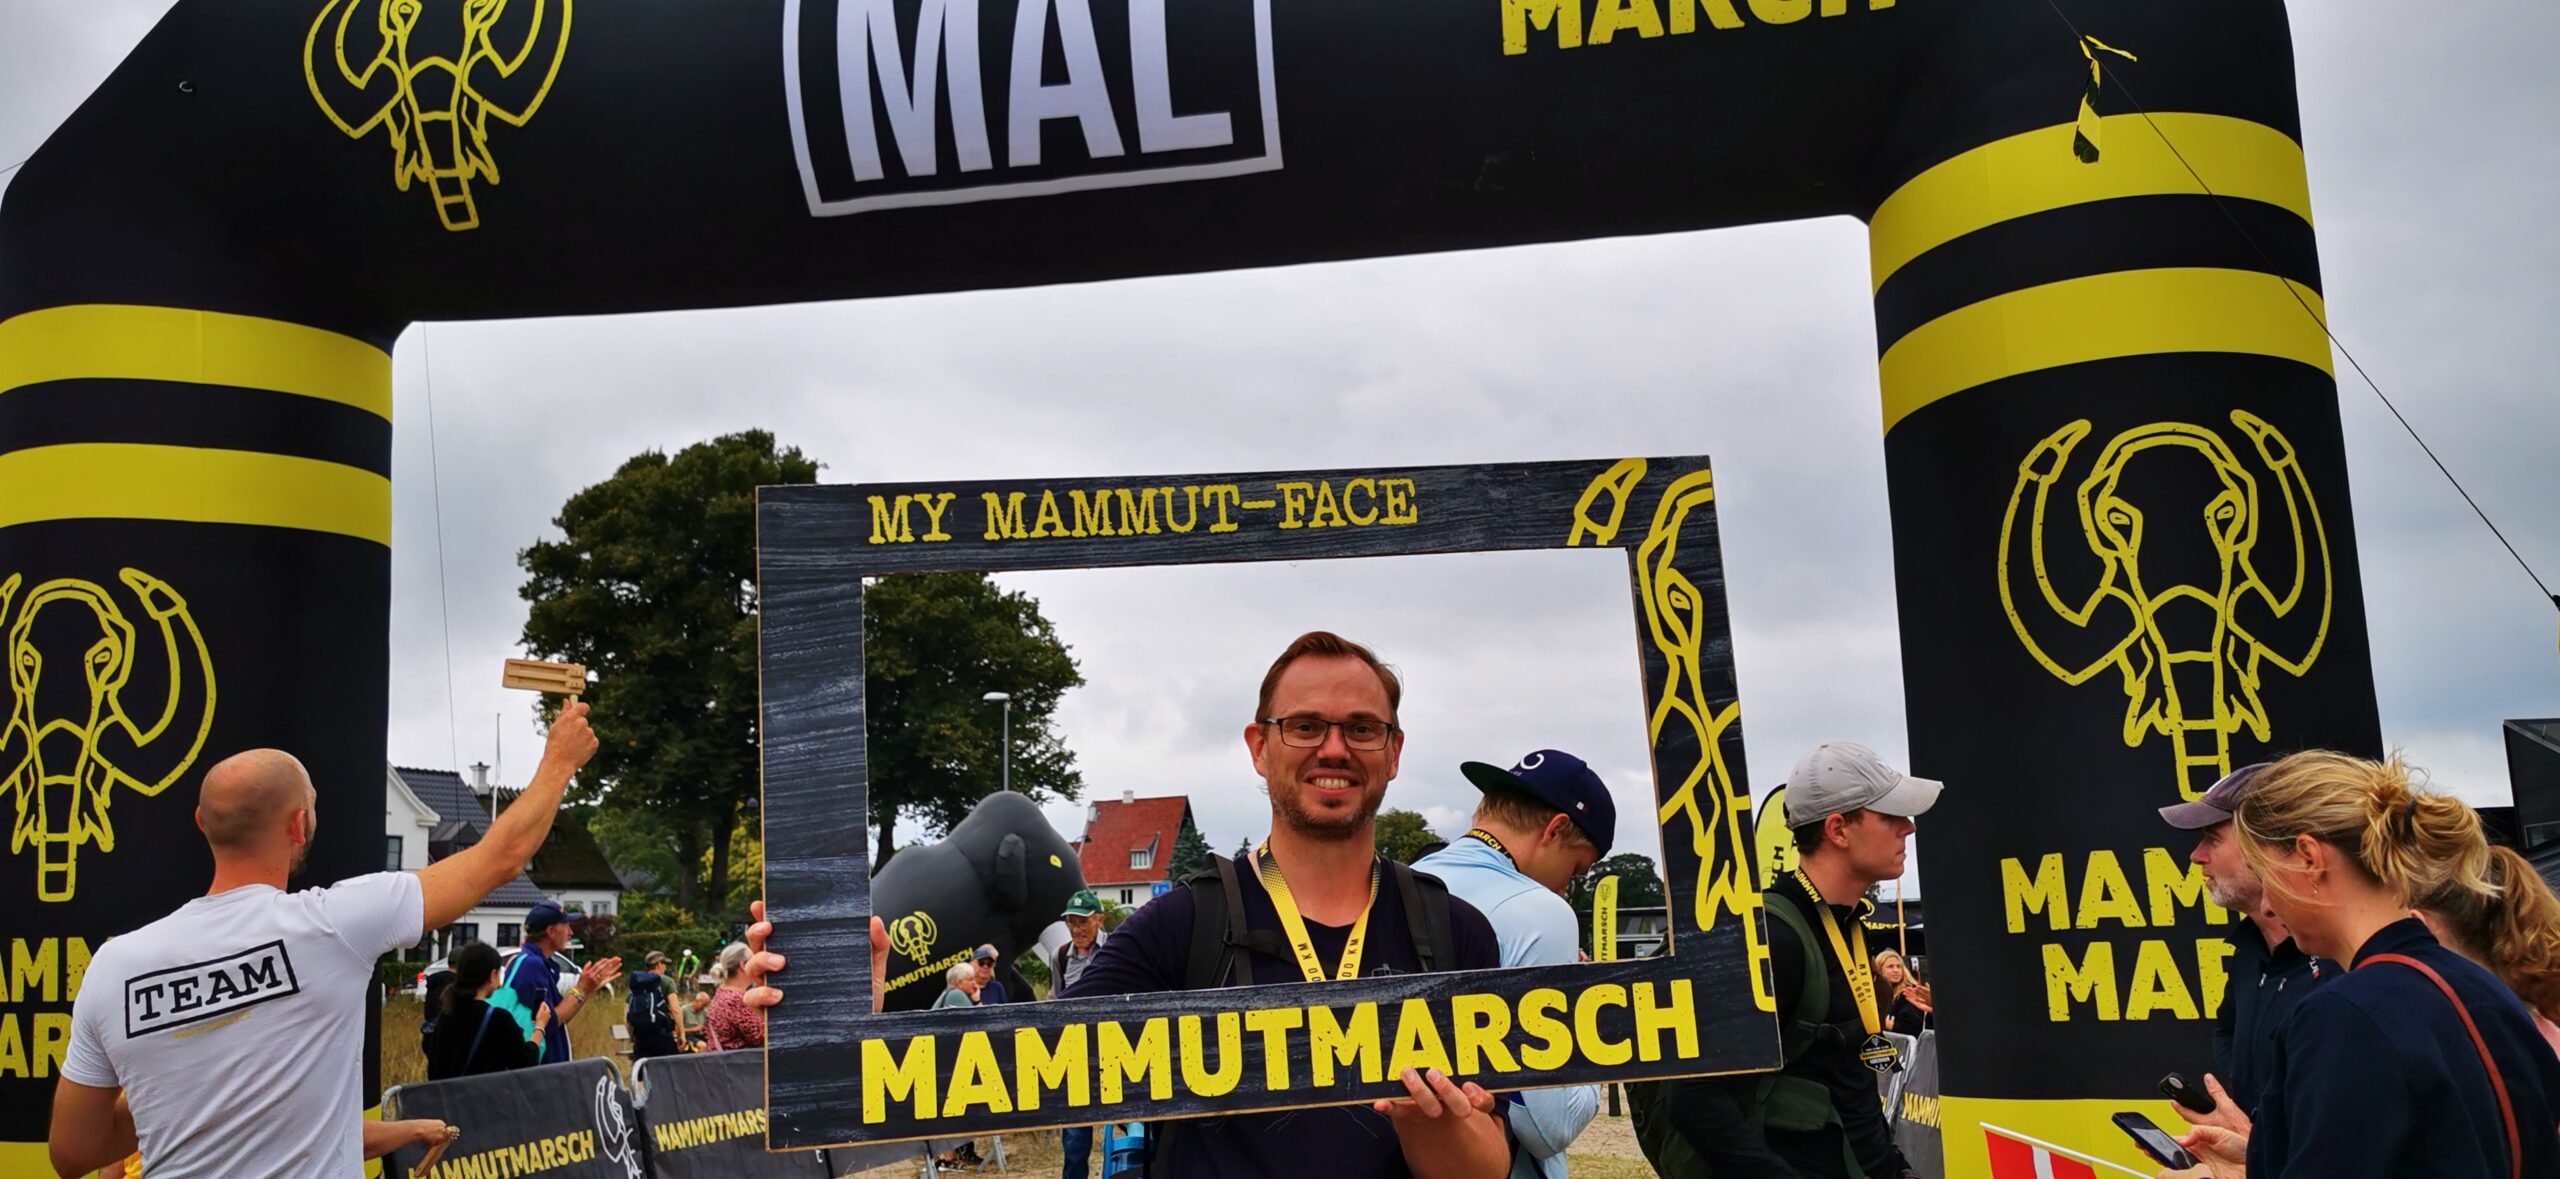 You are currently viewing Mammutmarch 100km København